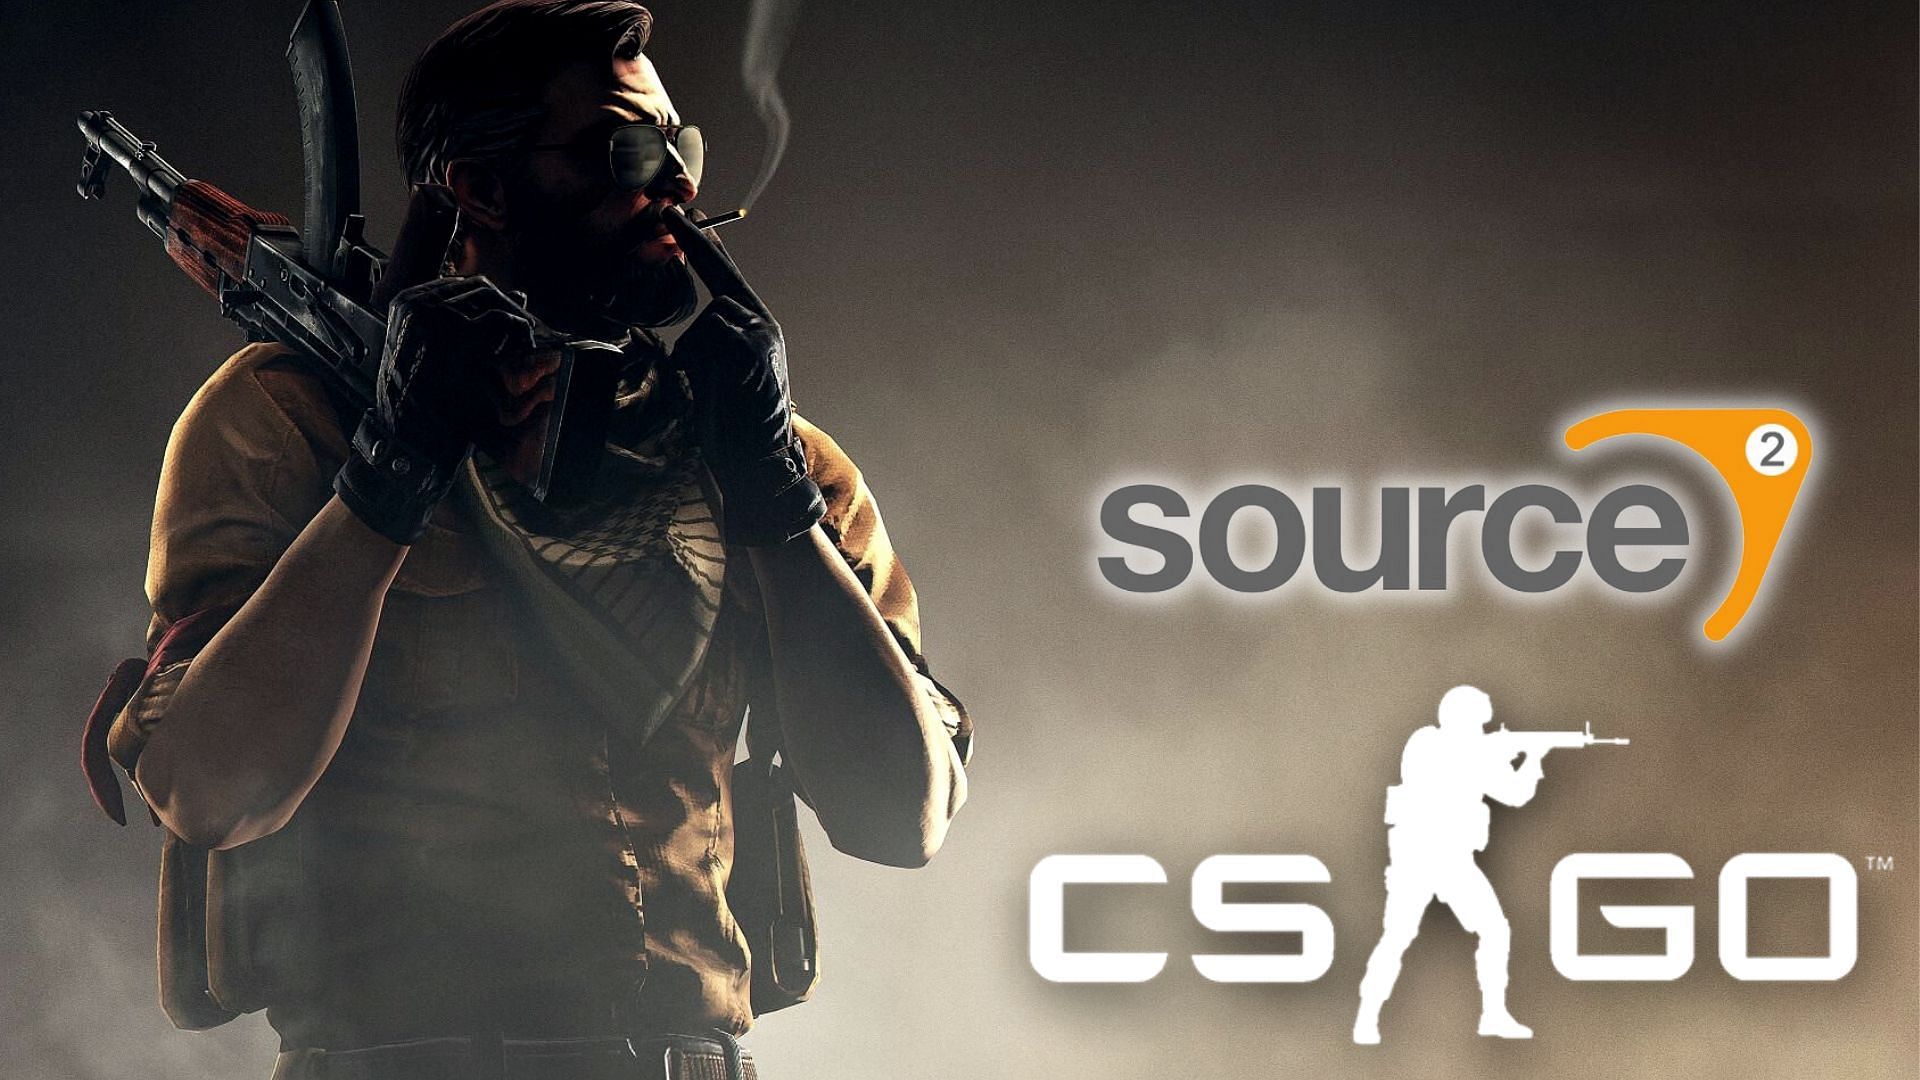 Sources double down on counter strike source 2 rumors, with beta  potentially coming this month — NeonLightsMedia